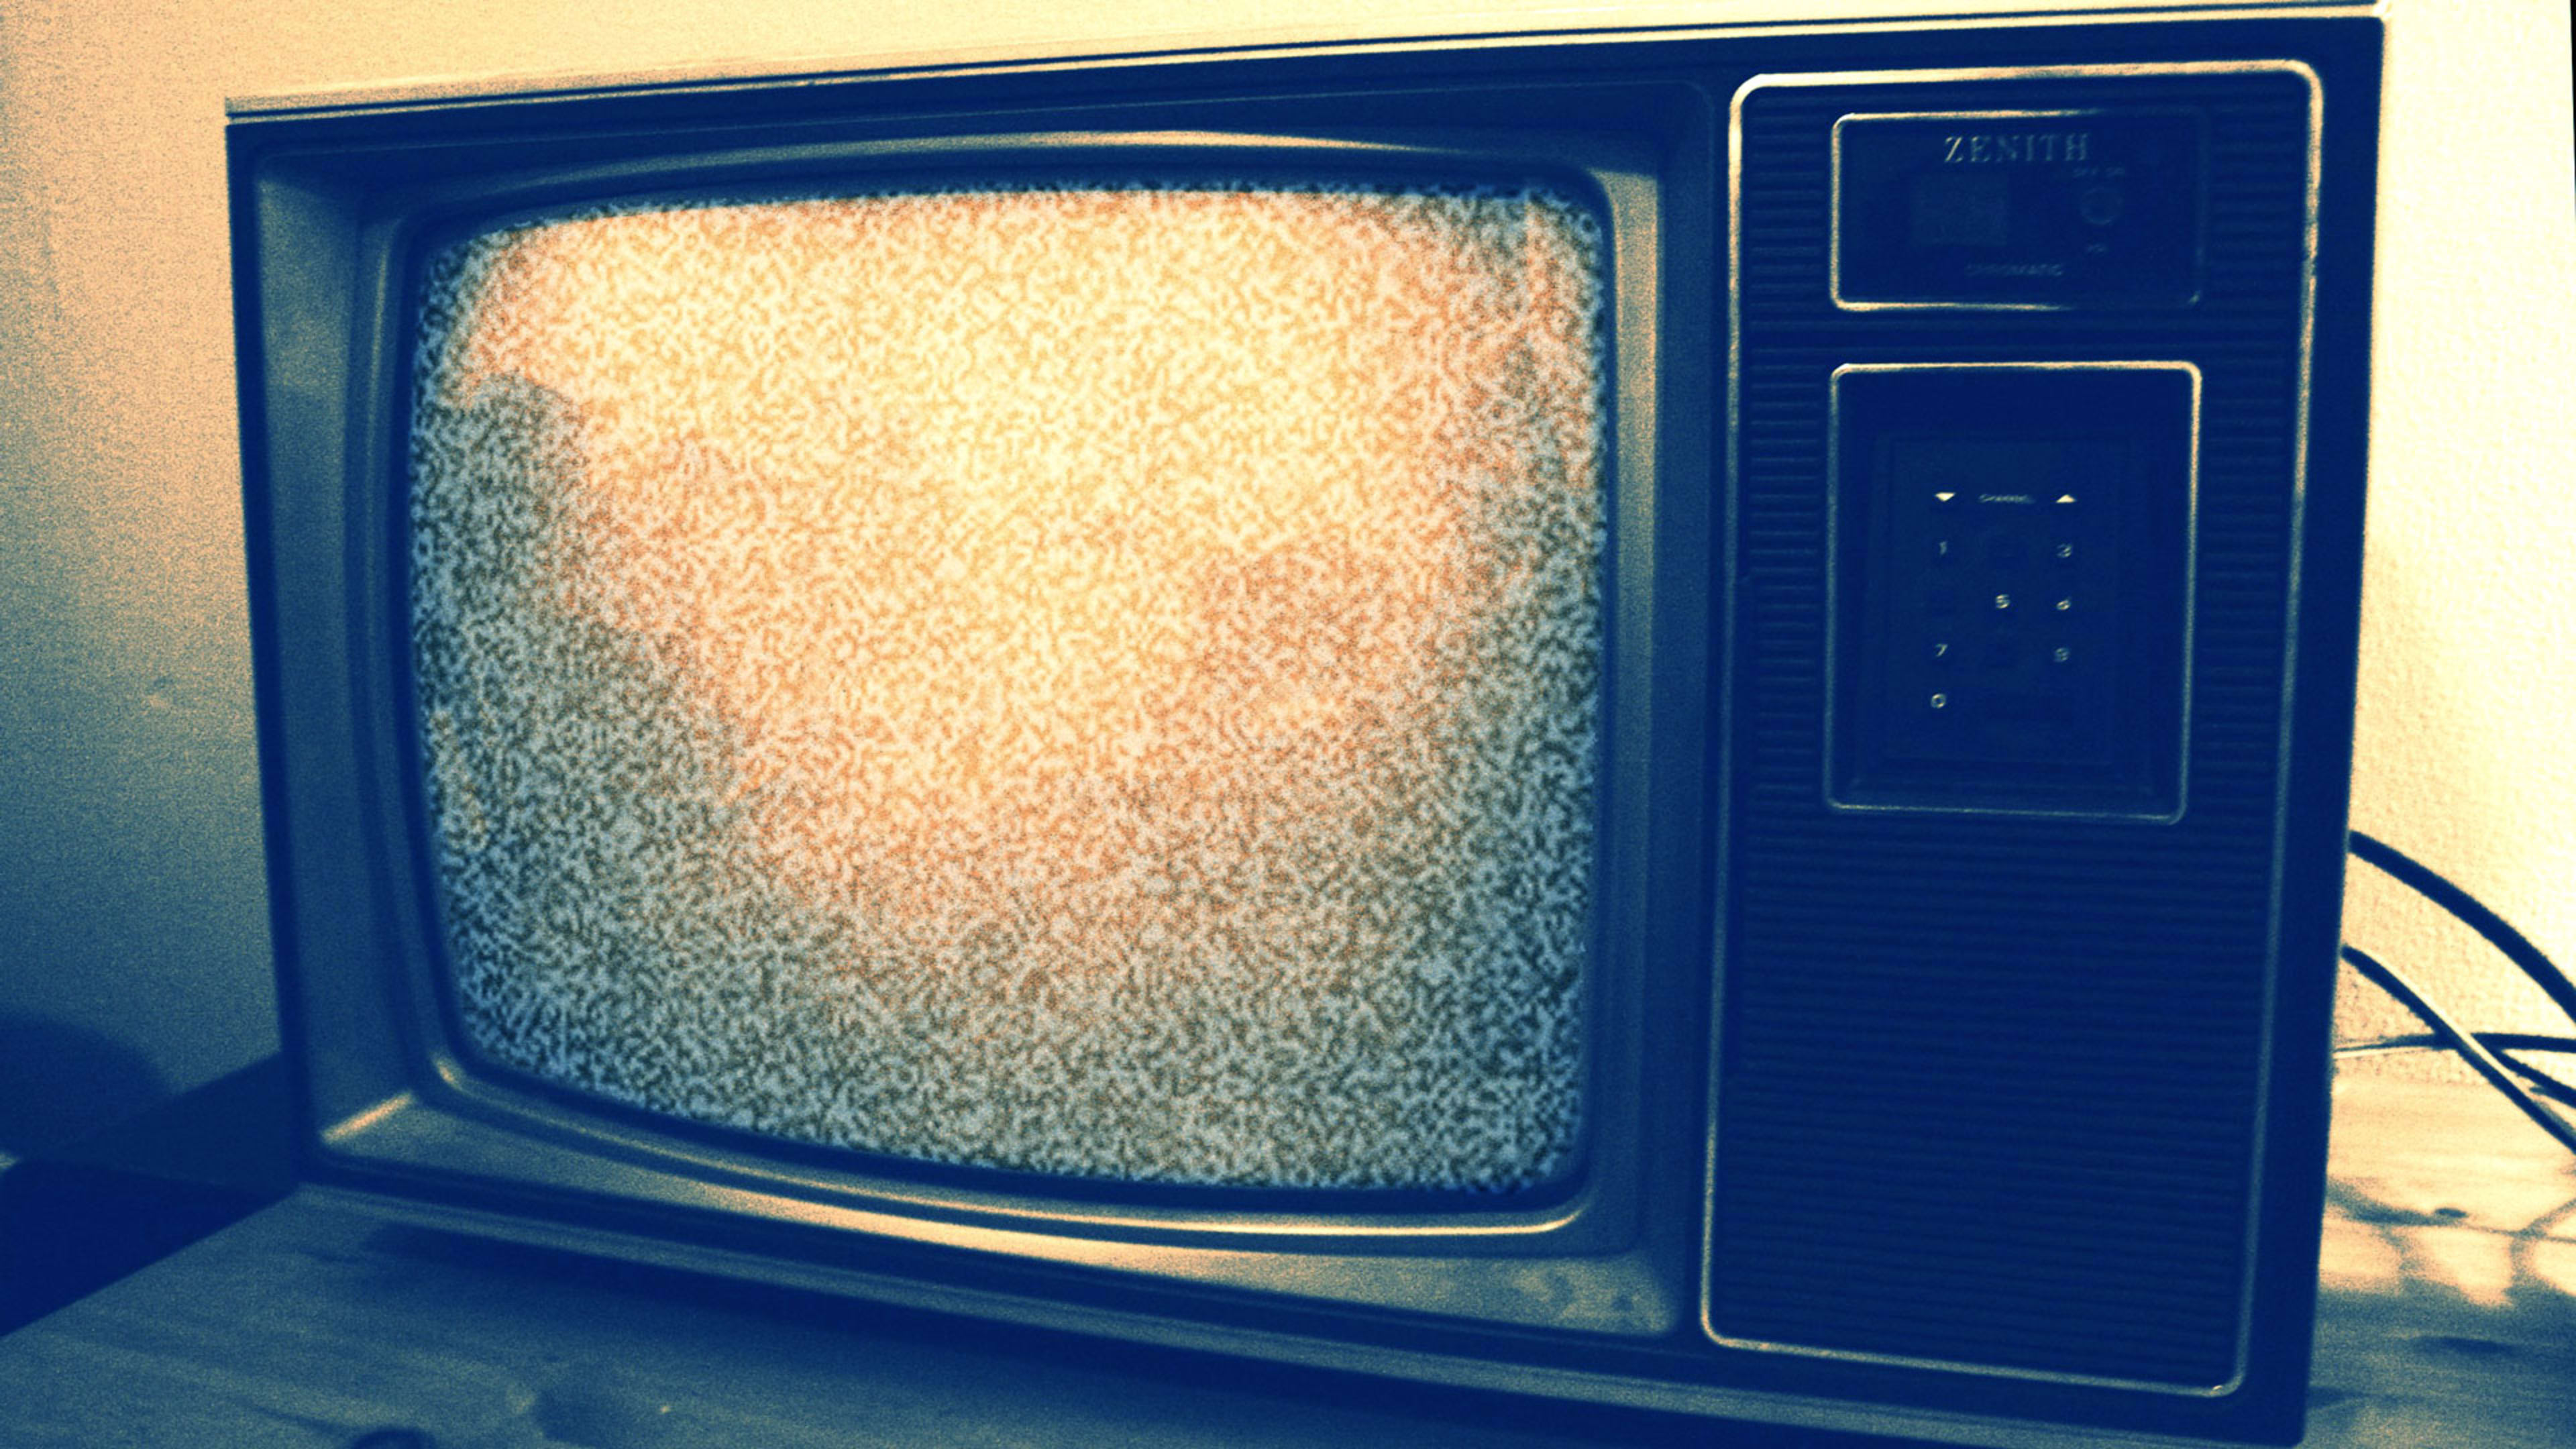 Cord-cutting gets even worse as pay TV sees another quarter of historic declines